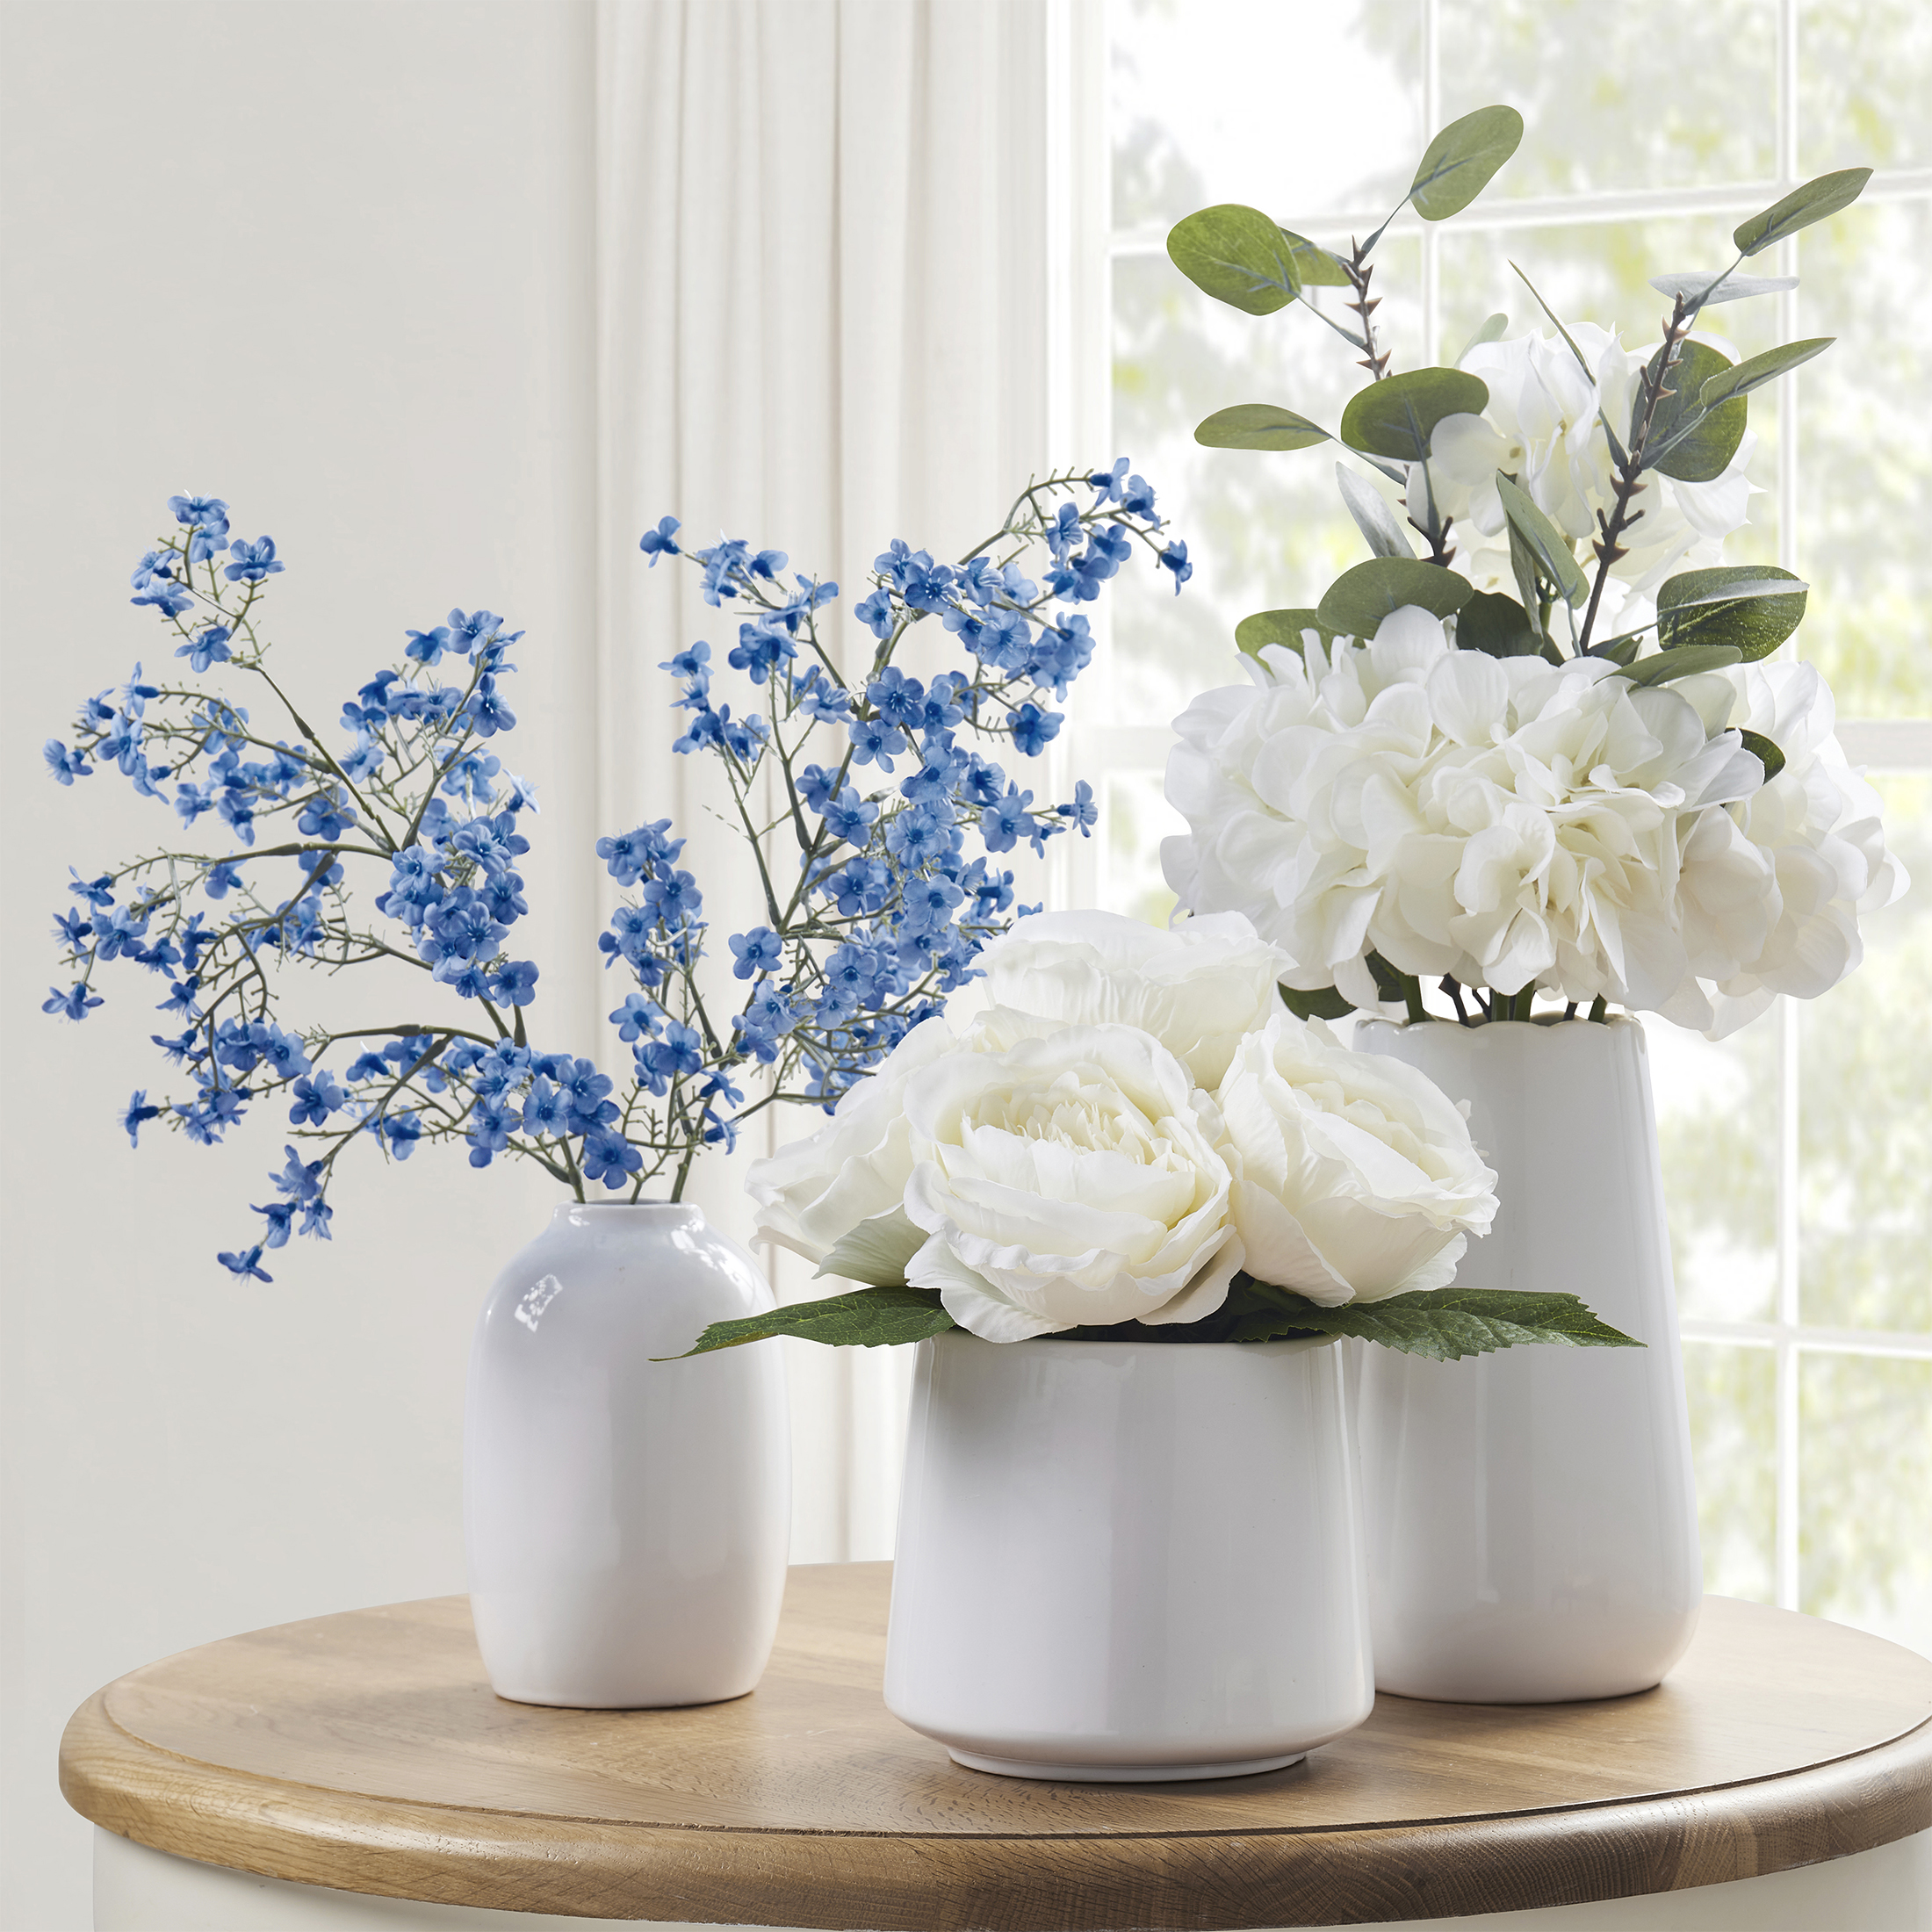 My Texas House Blue Faux Floral Springs in White Ceramic Vase, 16" Height - image 5 of 7